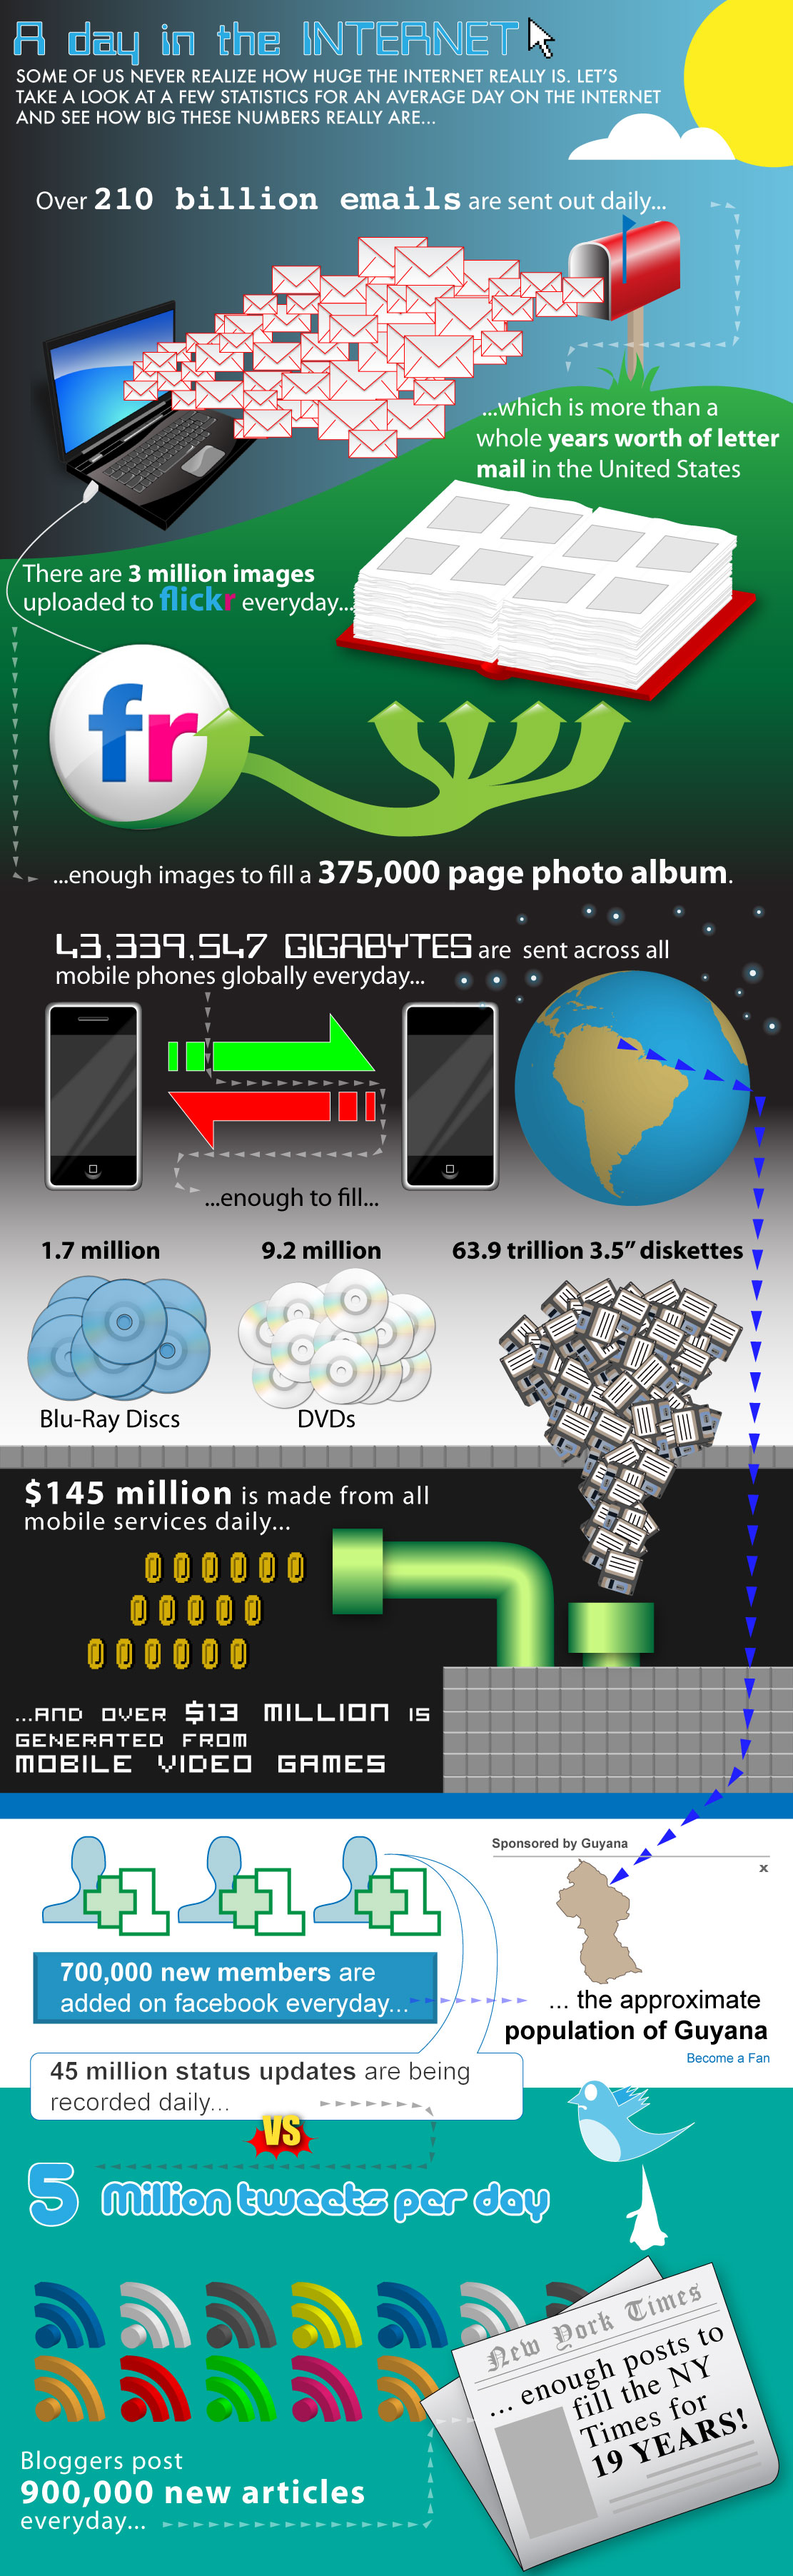 Interesting facts about daily internet usage